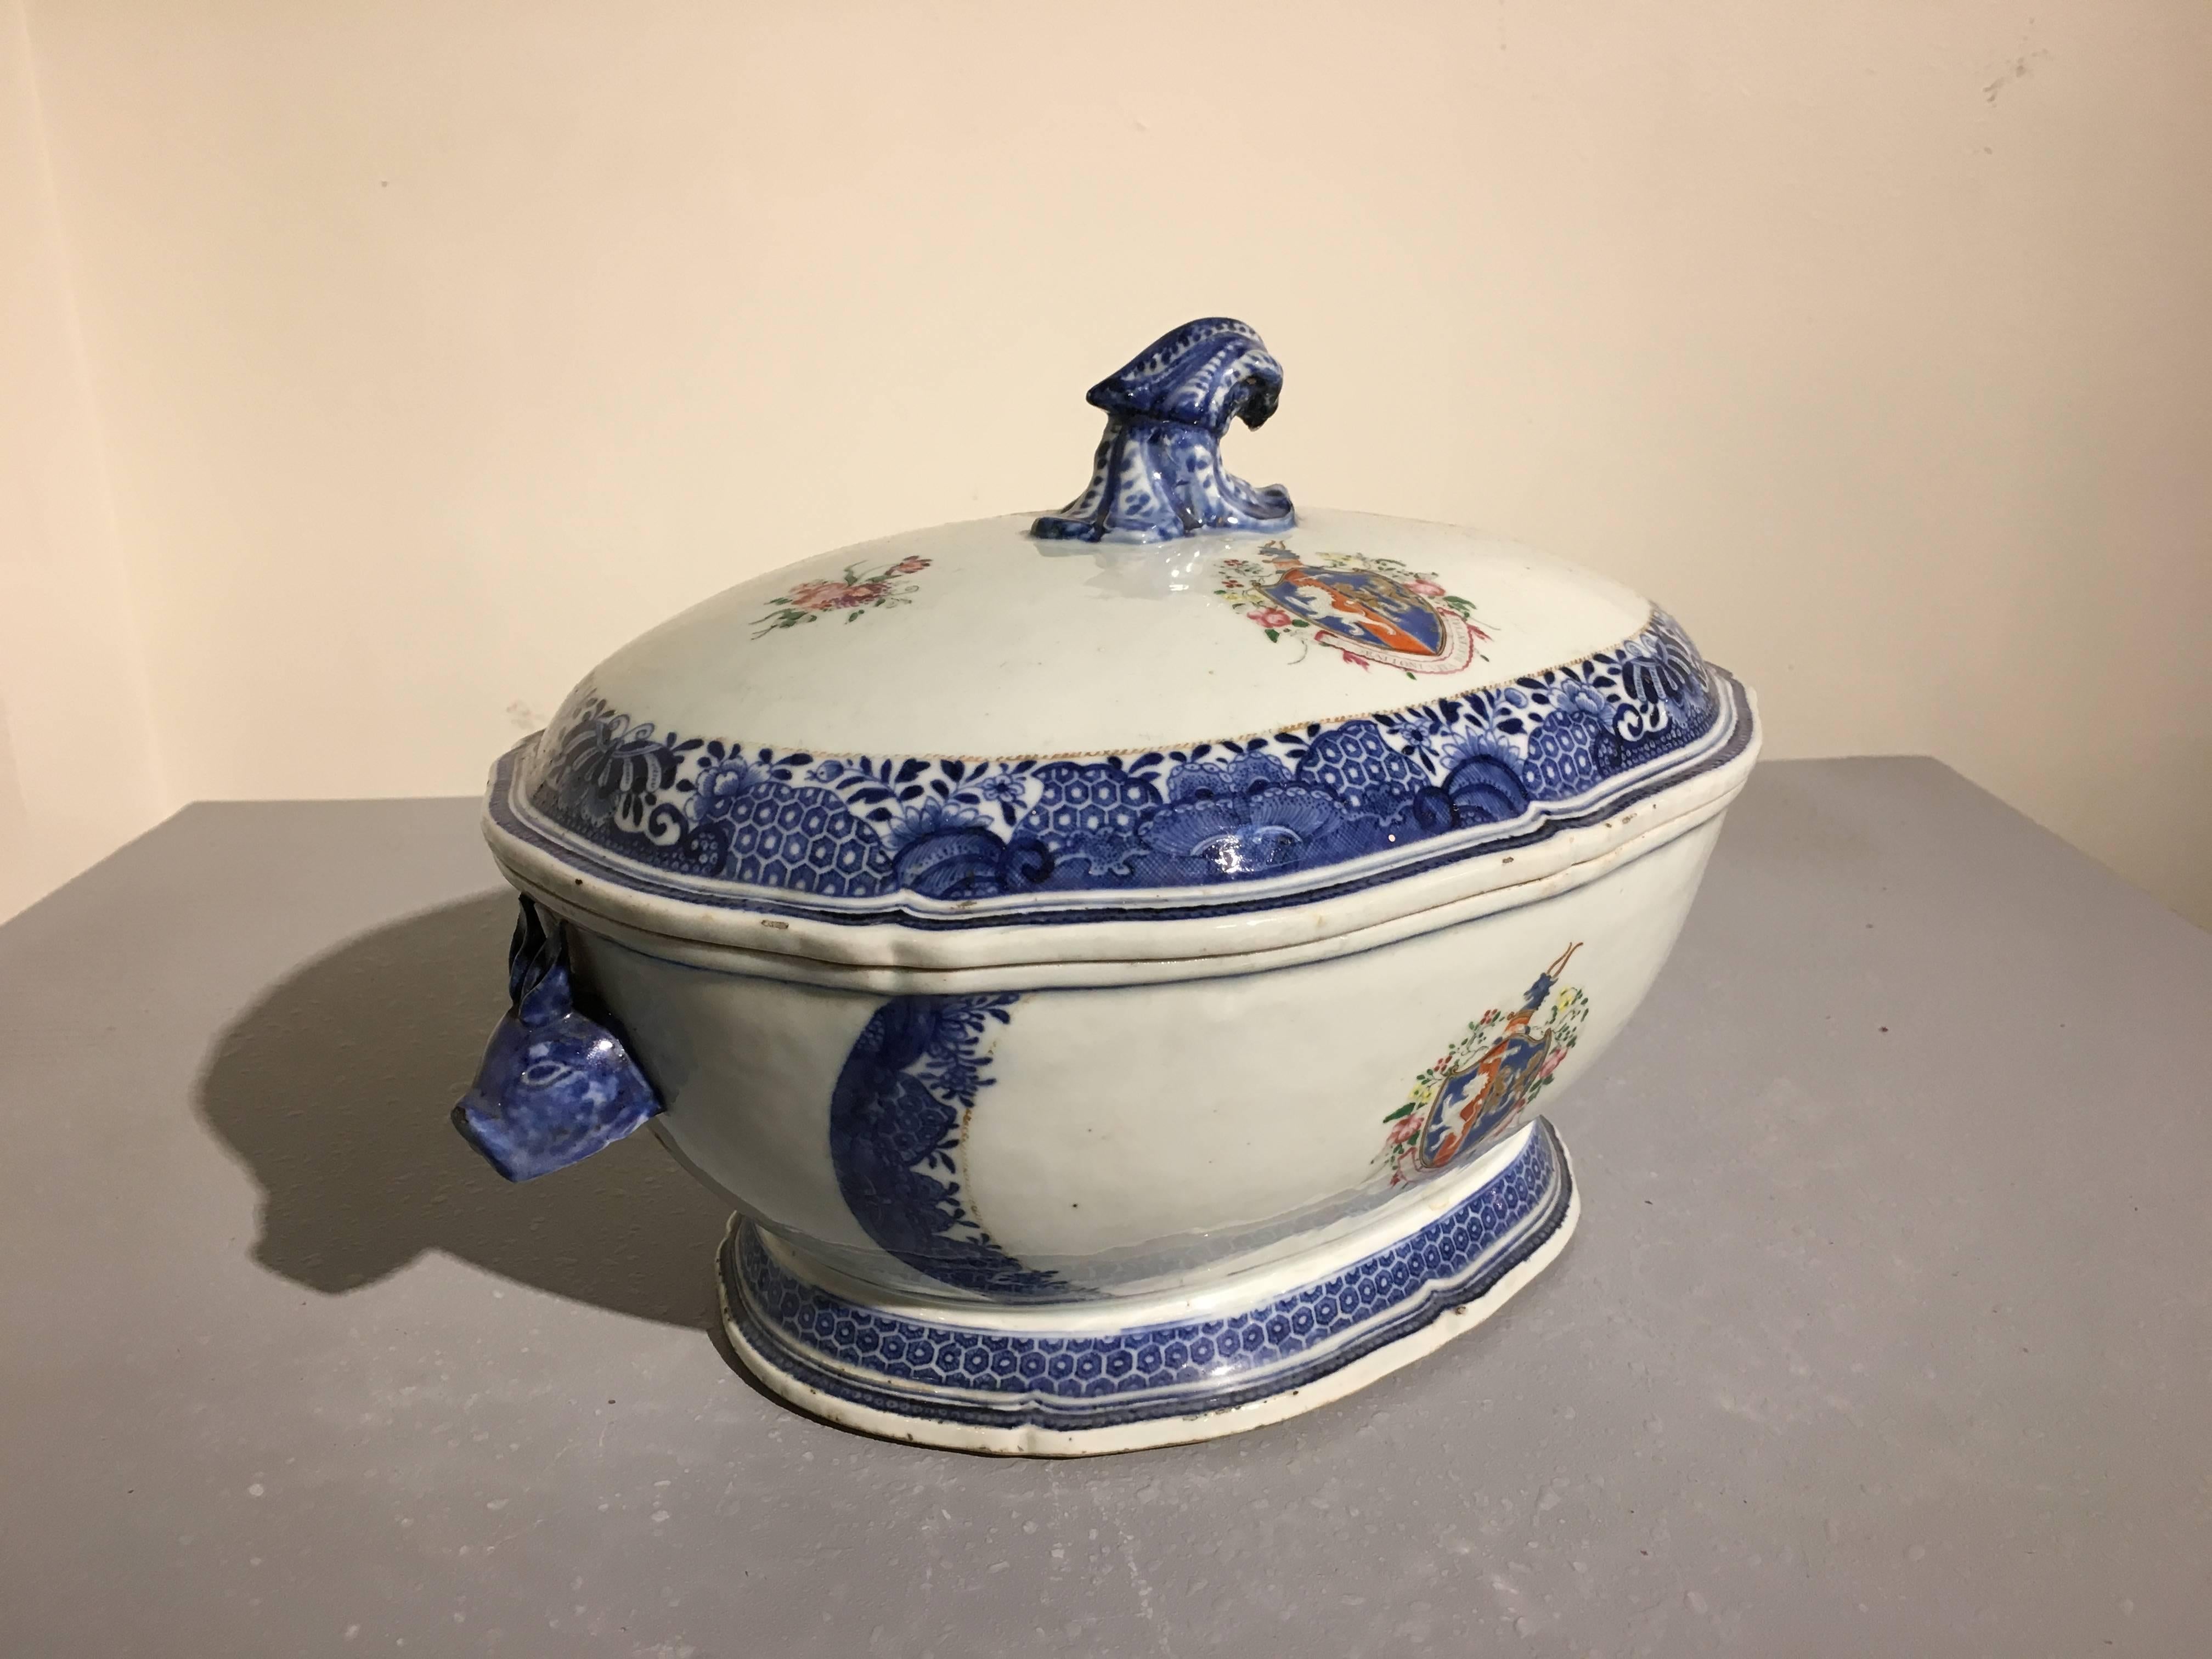 A rare Chinese export armorial tureen decorated in both underglaze blue and white and overglaze famille rose enamels. The tureen of typical form, with rabbit head handles to the body, and a squash stem handle to the lid, all supported by a slightly